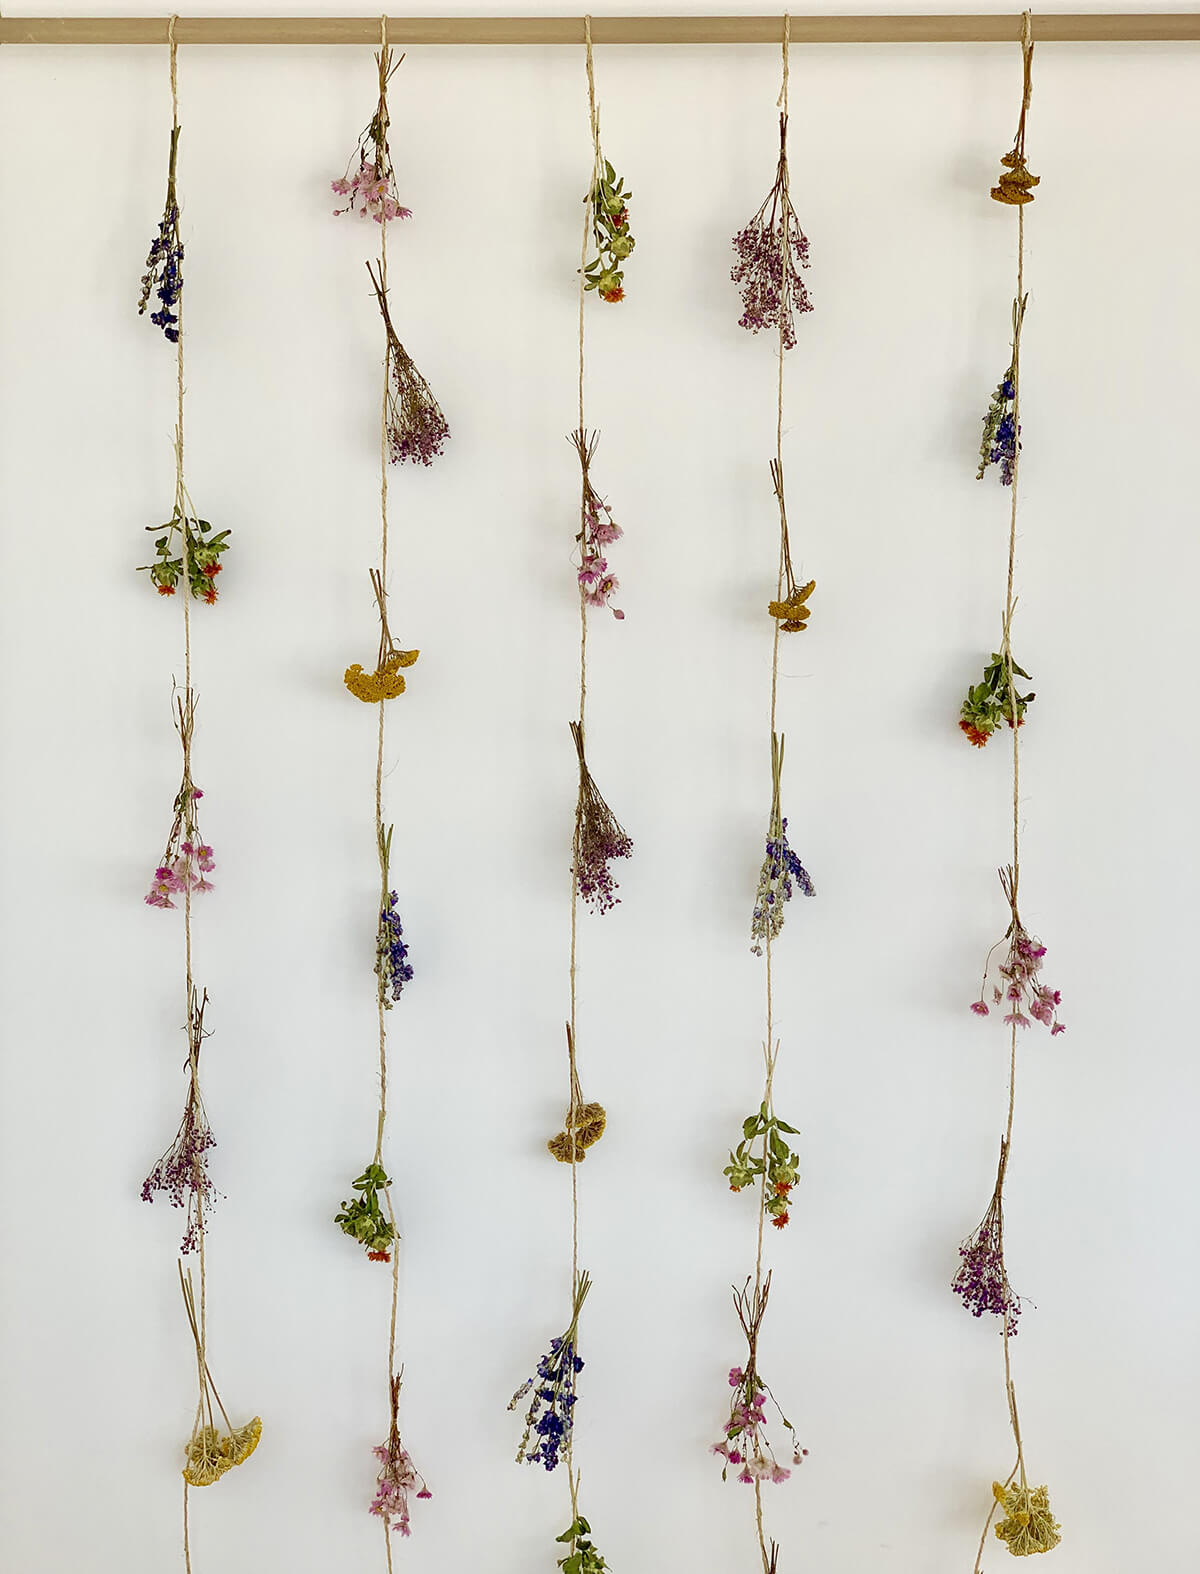 Hanging by a Thread and Beautifully Dried Out Flower Garland